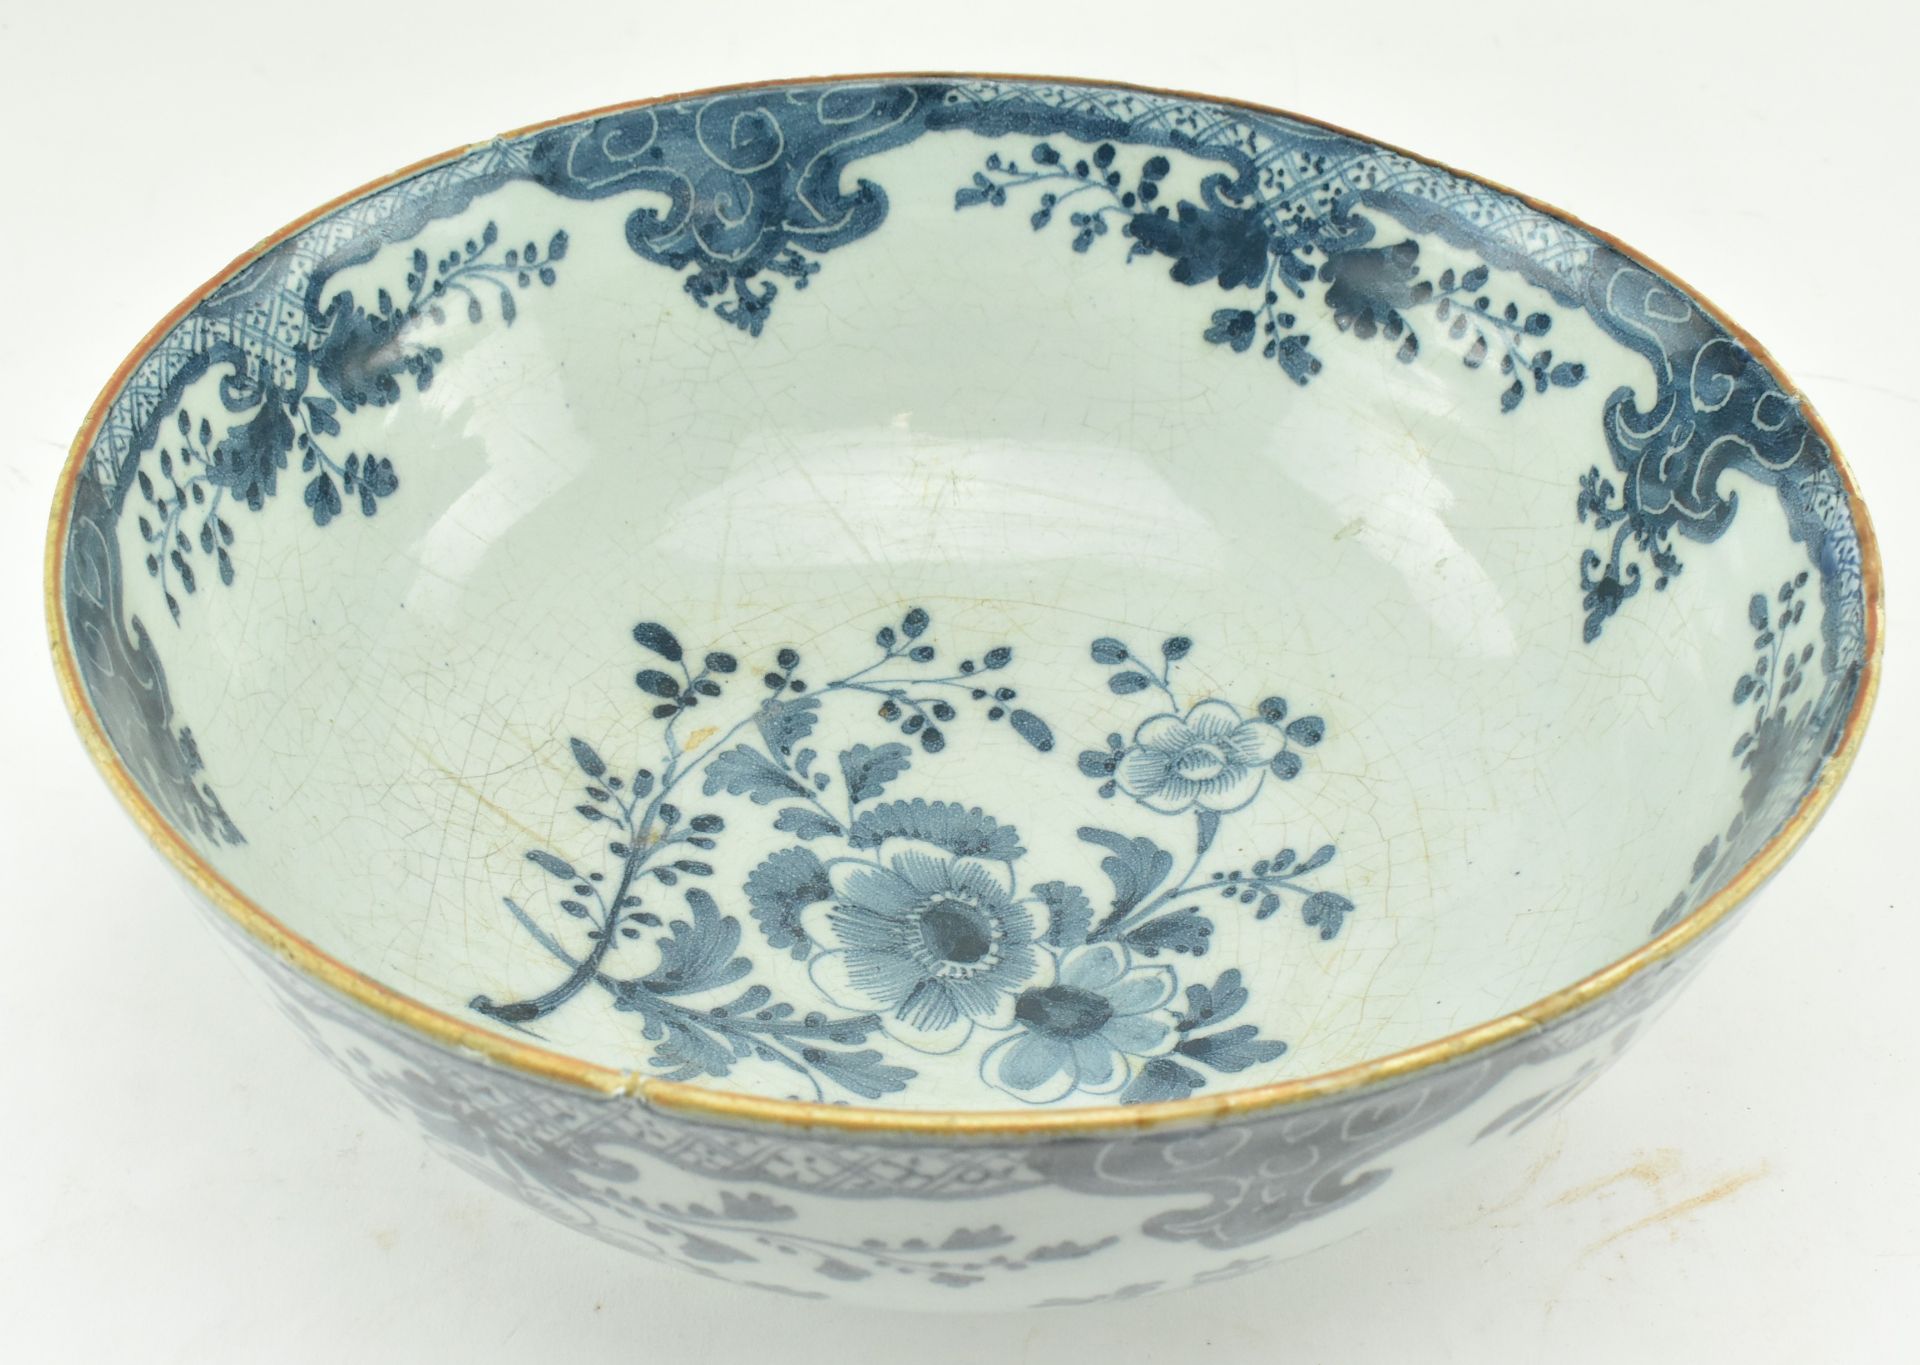 BELIEVED 18TH CENTURY ENGLISH BLUE & WHITE DELFT CERAMIC BOWL - Image 2 of 8